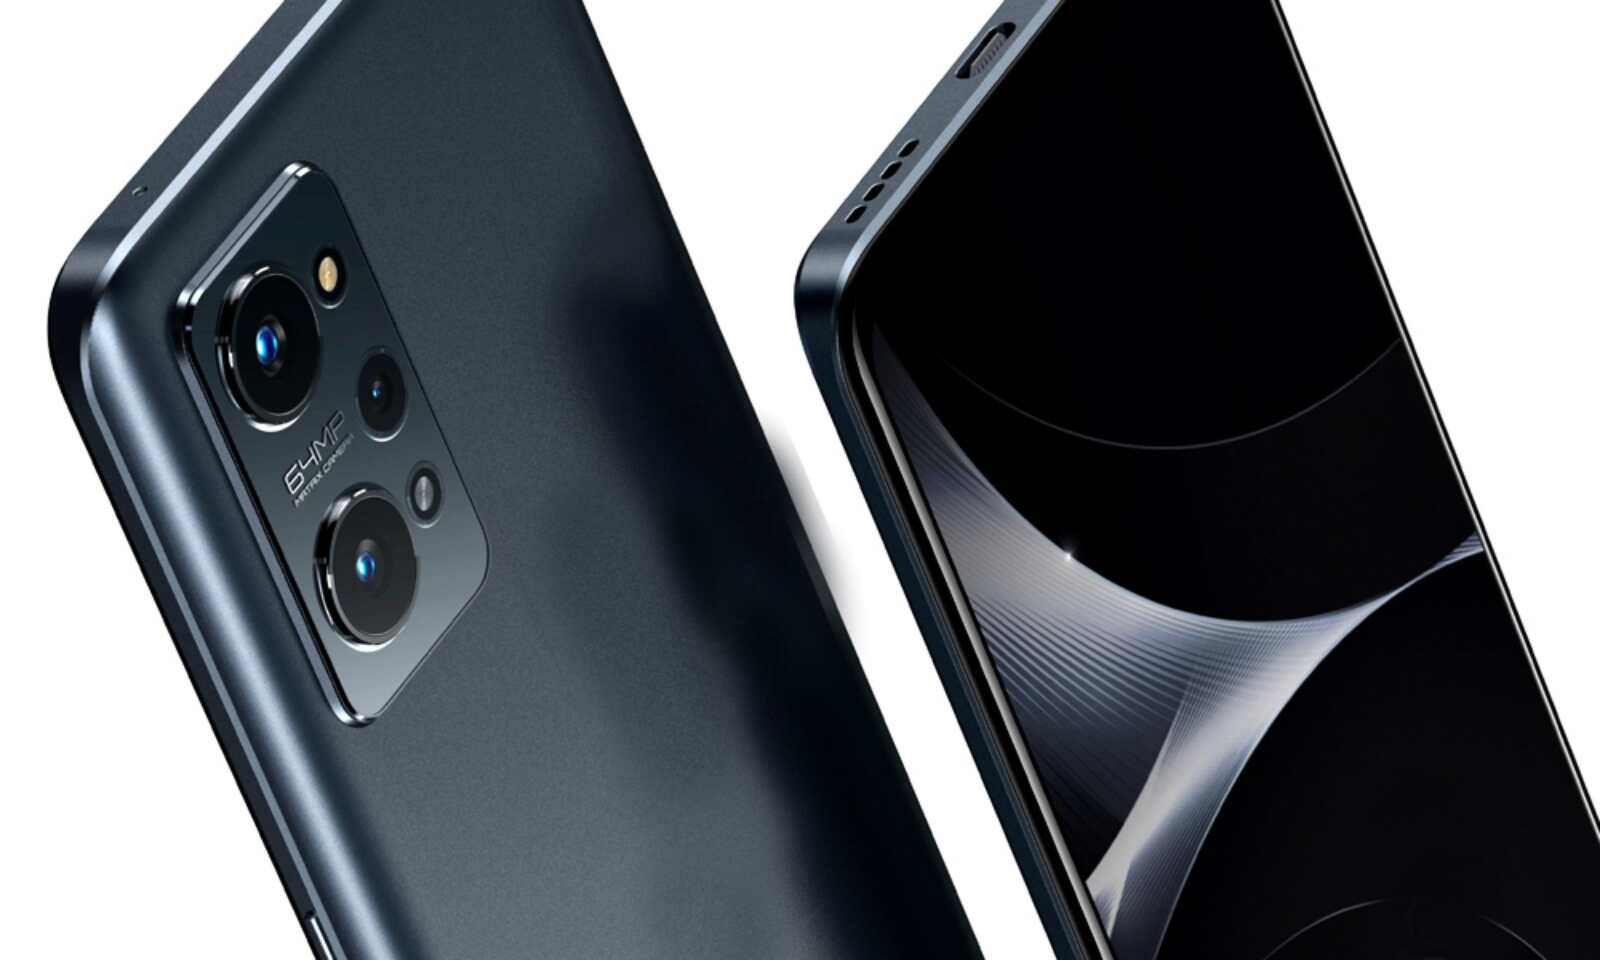 Realme GT Neo 2 launch confirmed, specifications tipped